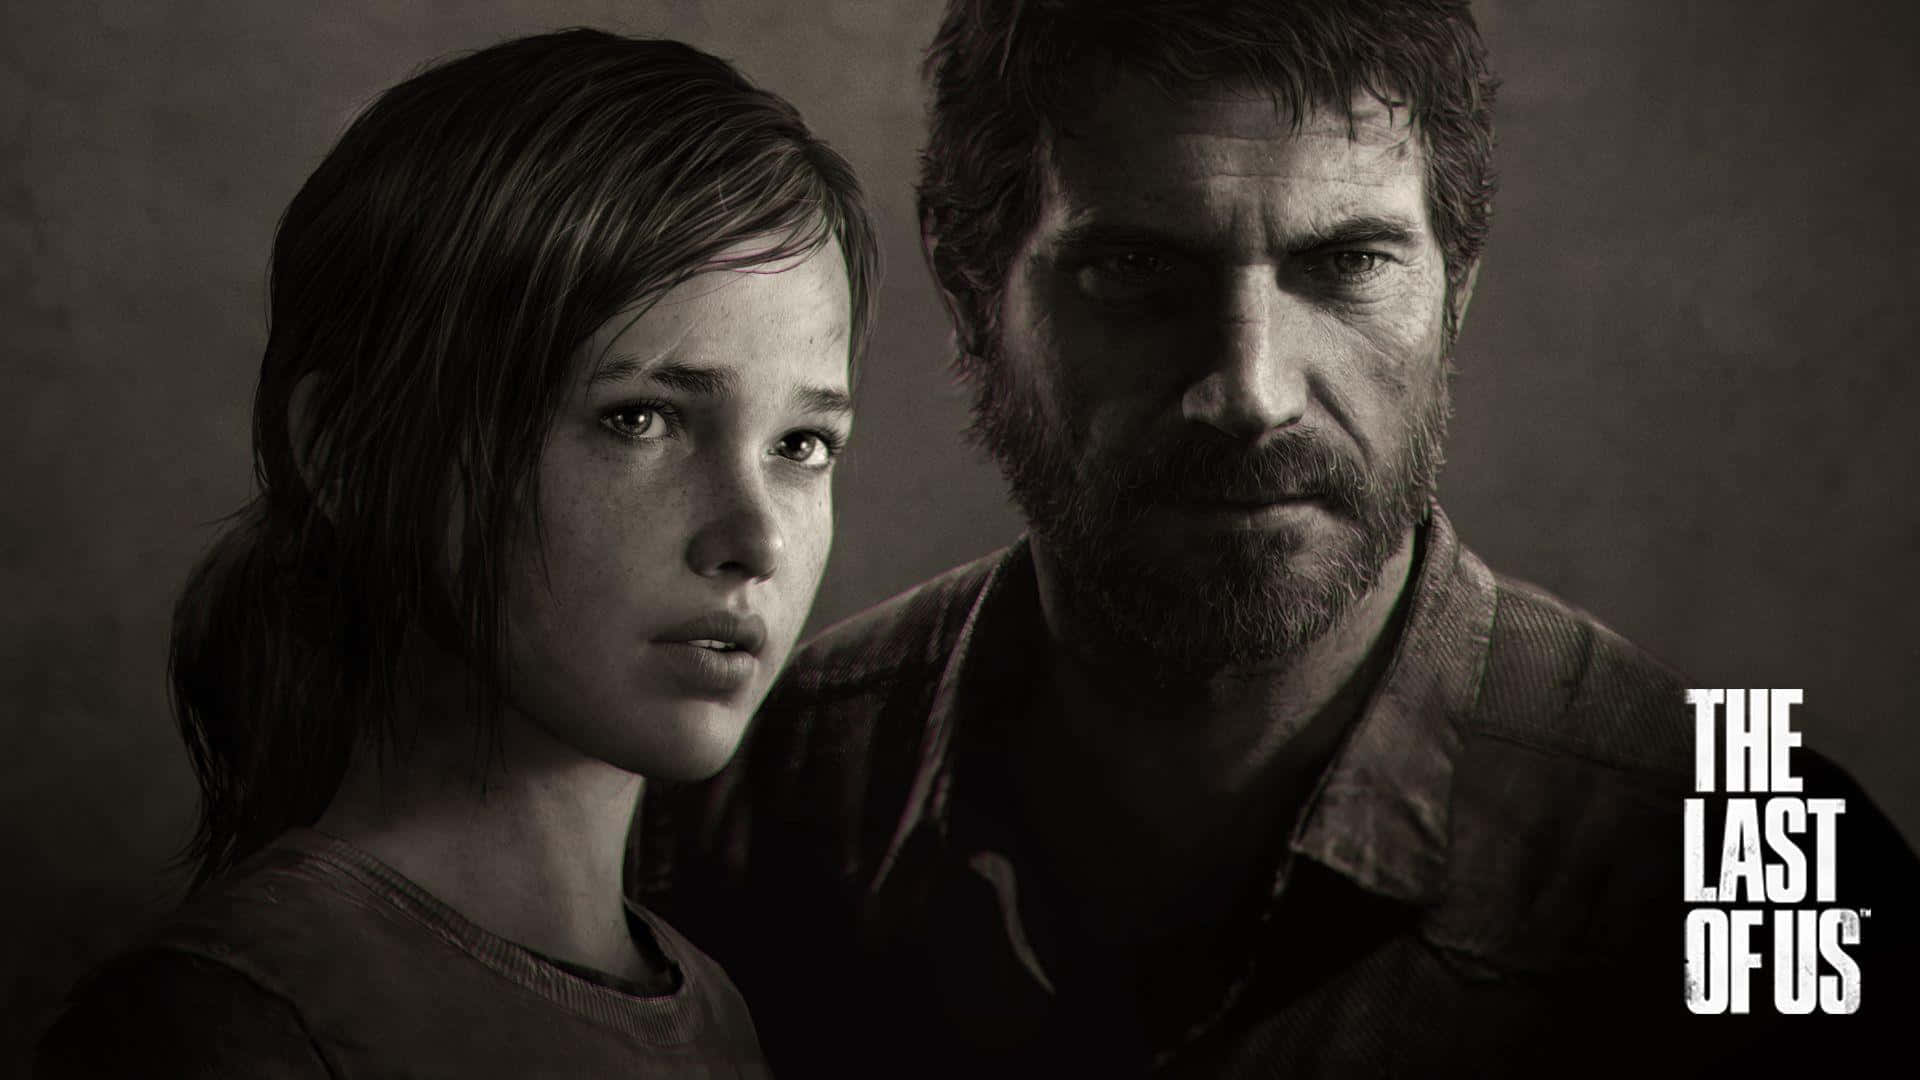 The Last of Us: Joel and Ellie's Journey